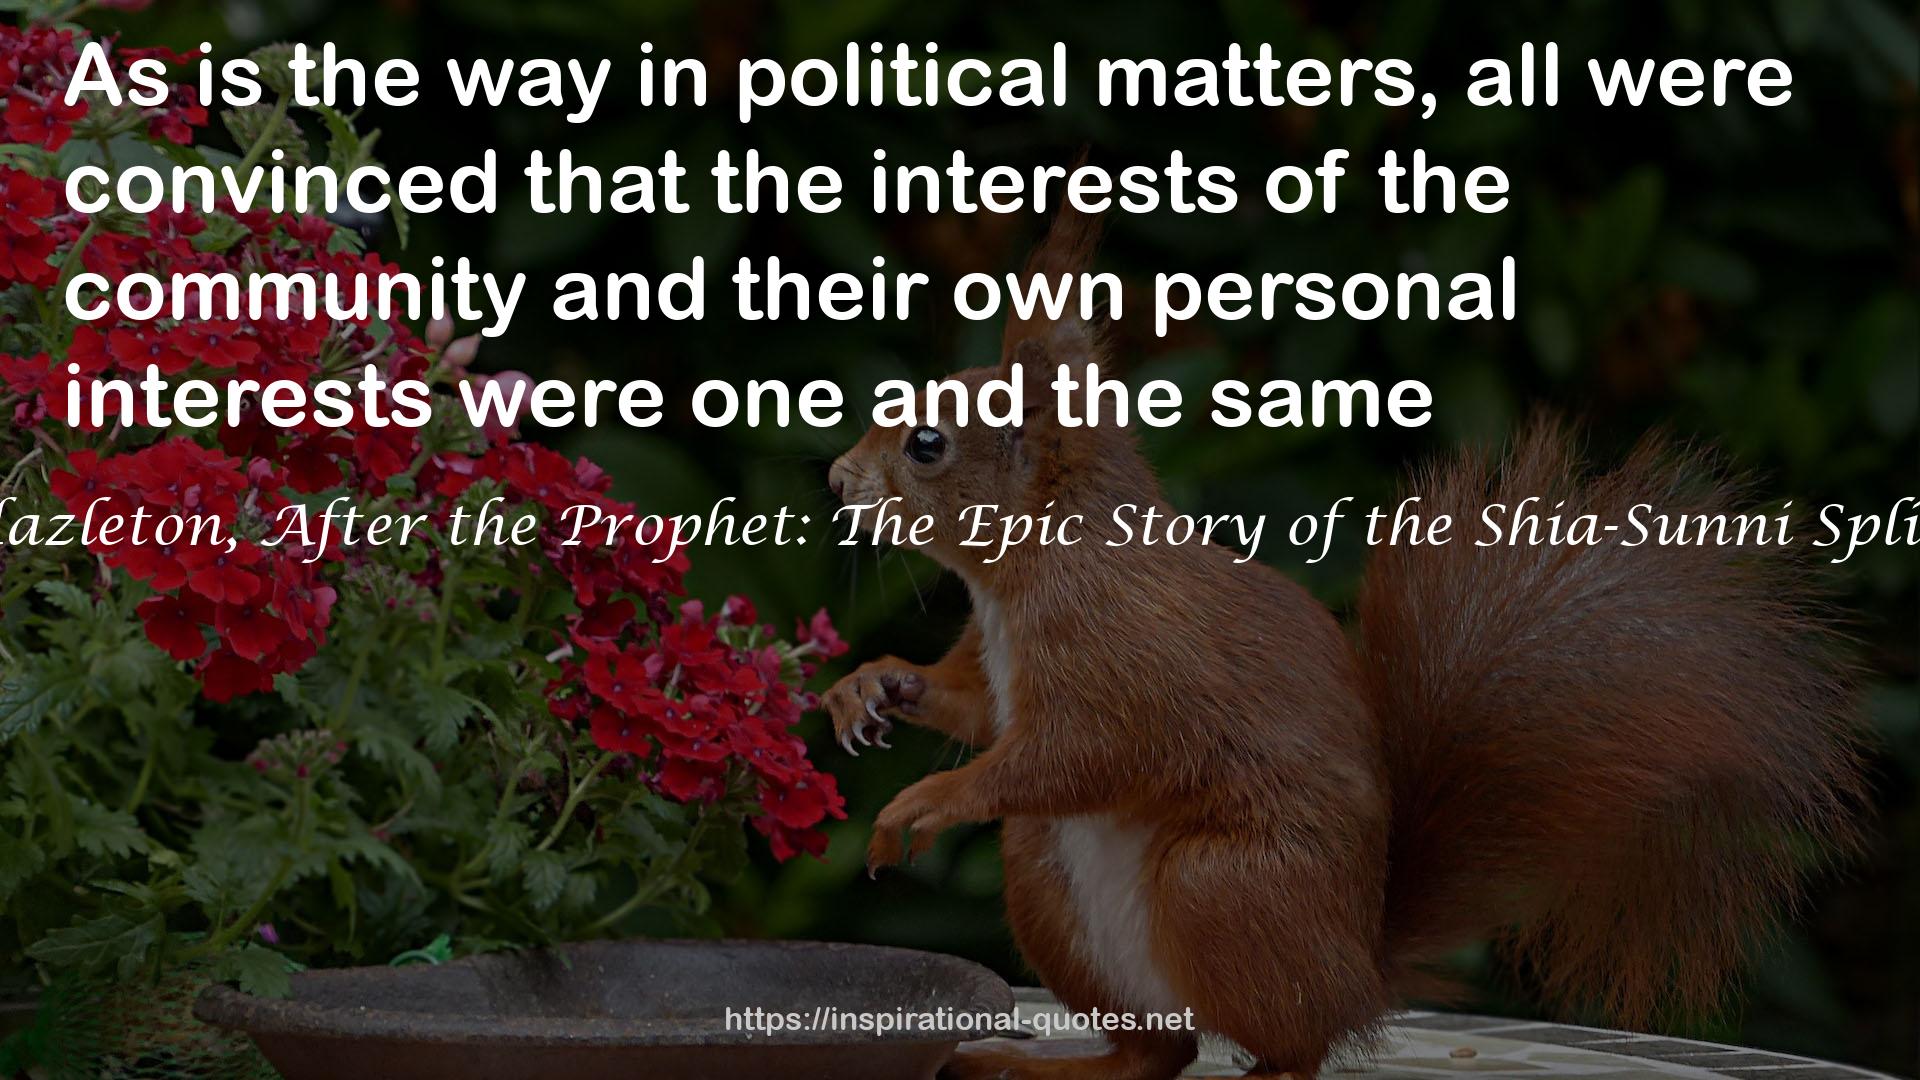 Lesley Hazleton, After the Prophet: The Epic Story of the Shia-Sunni Split in Islam QUOTES